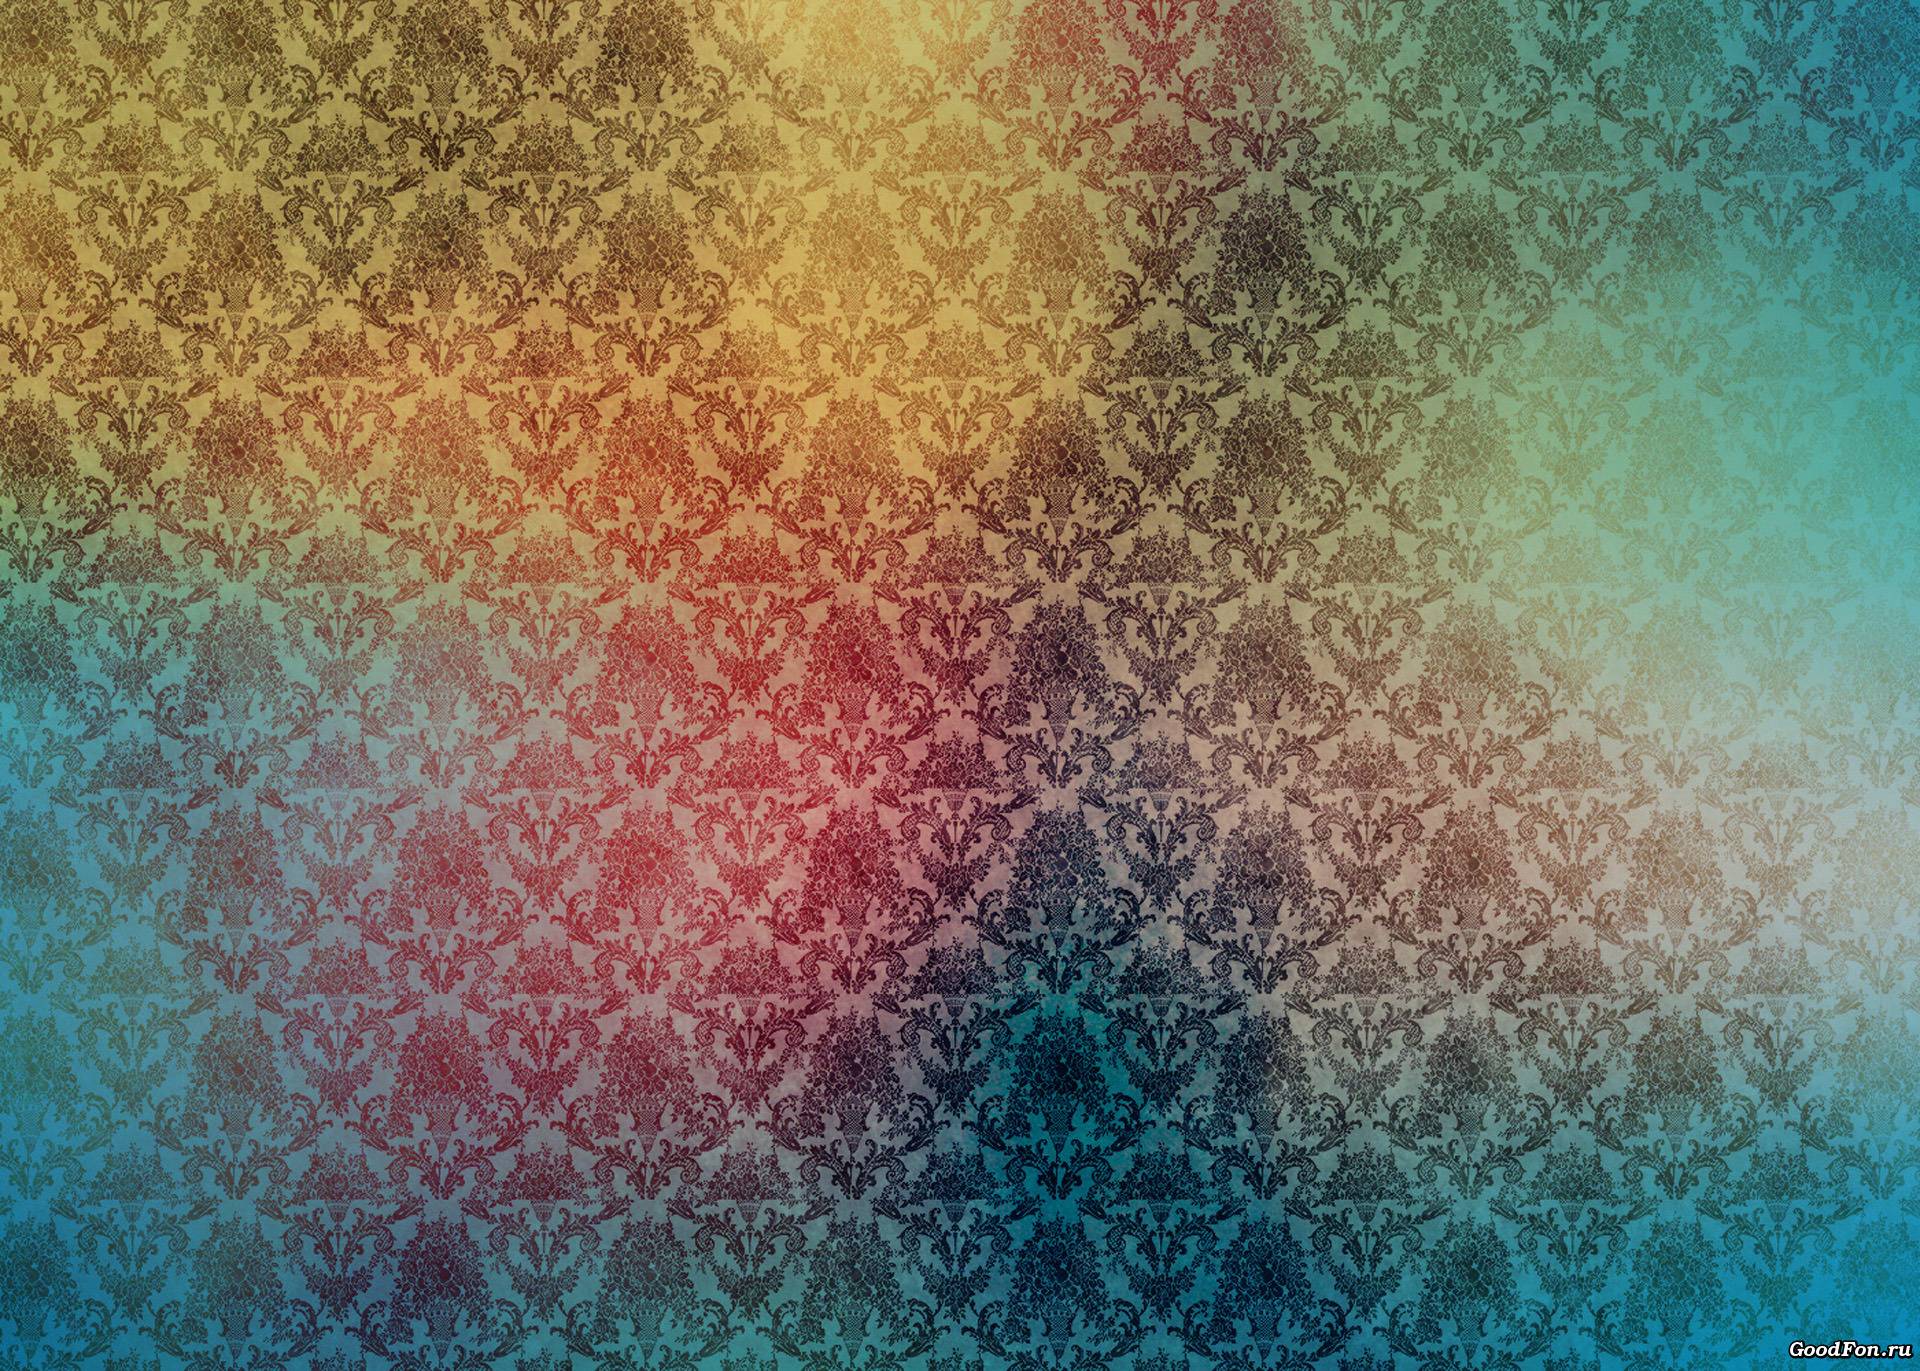 Colored Damask on Blur Colored Texture. Background and Texture